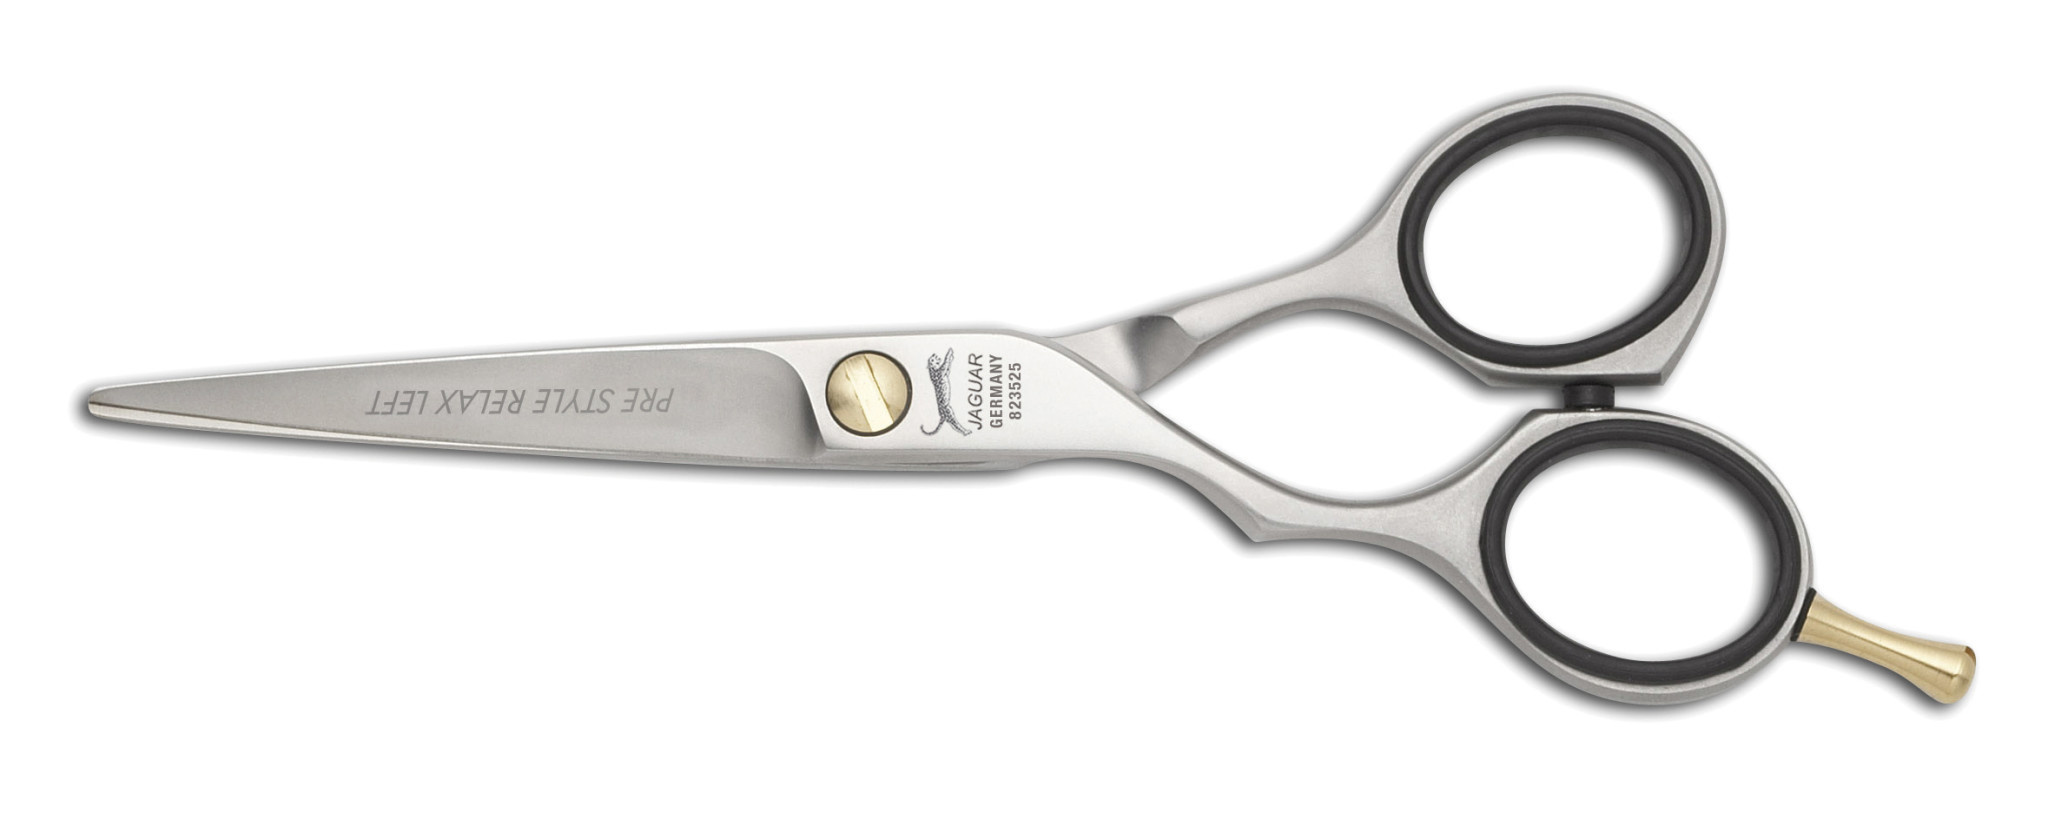 Prestyle Relax Left Shears